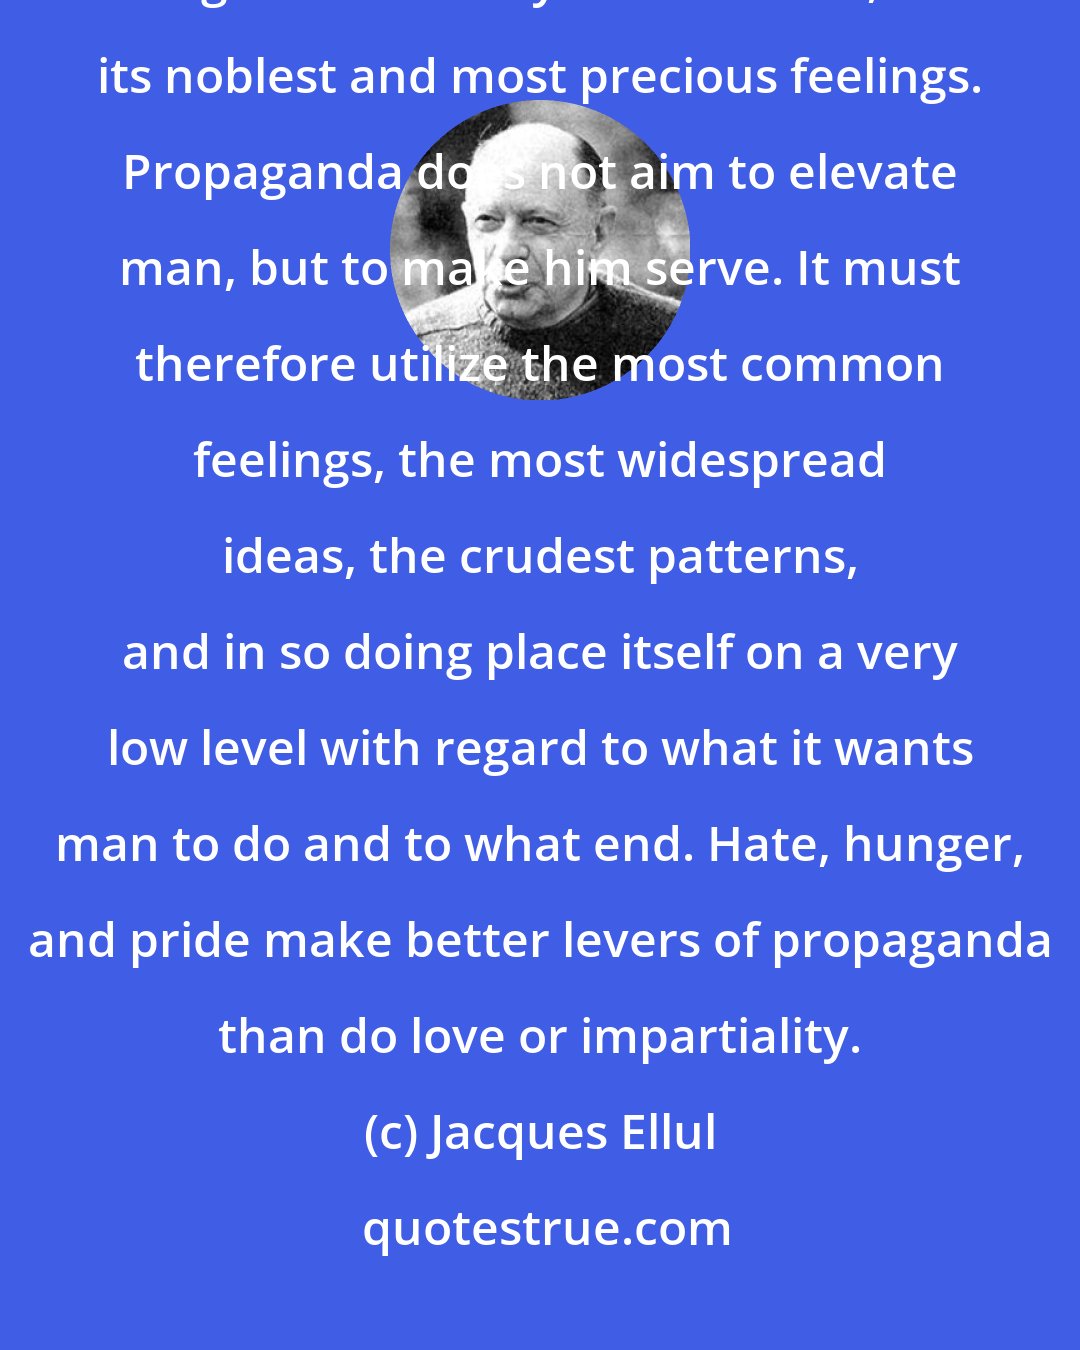 Jacques Ellul: Propaganda must not concern itself with what is best in man - the highest goals humanity sets for itself, its noblest and most precious feelings. Propaganda does not aim to elevate man, but to make him serve. It must therefore utilize the most common feelings, the most widespread ideas, the crudest patterns, and in so doing place itself on a very low level with regard to what it wants man to do and to what end. Hate, hunger, and pride make better levers of propaganda than do love or impartiality.